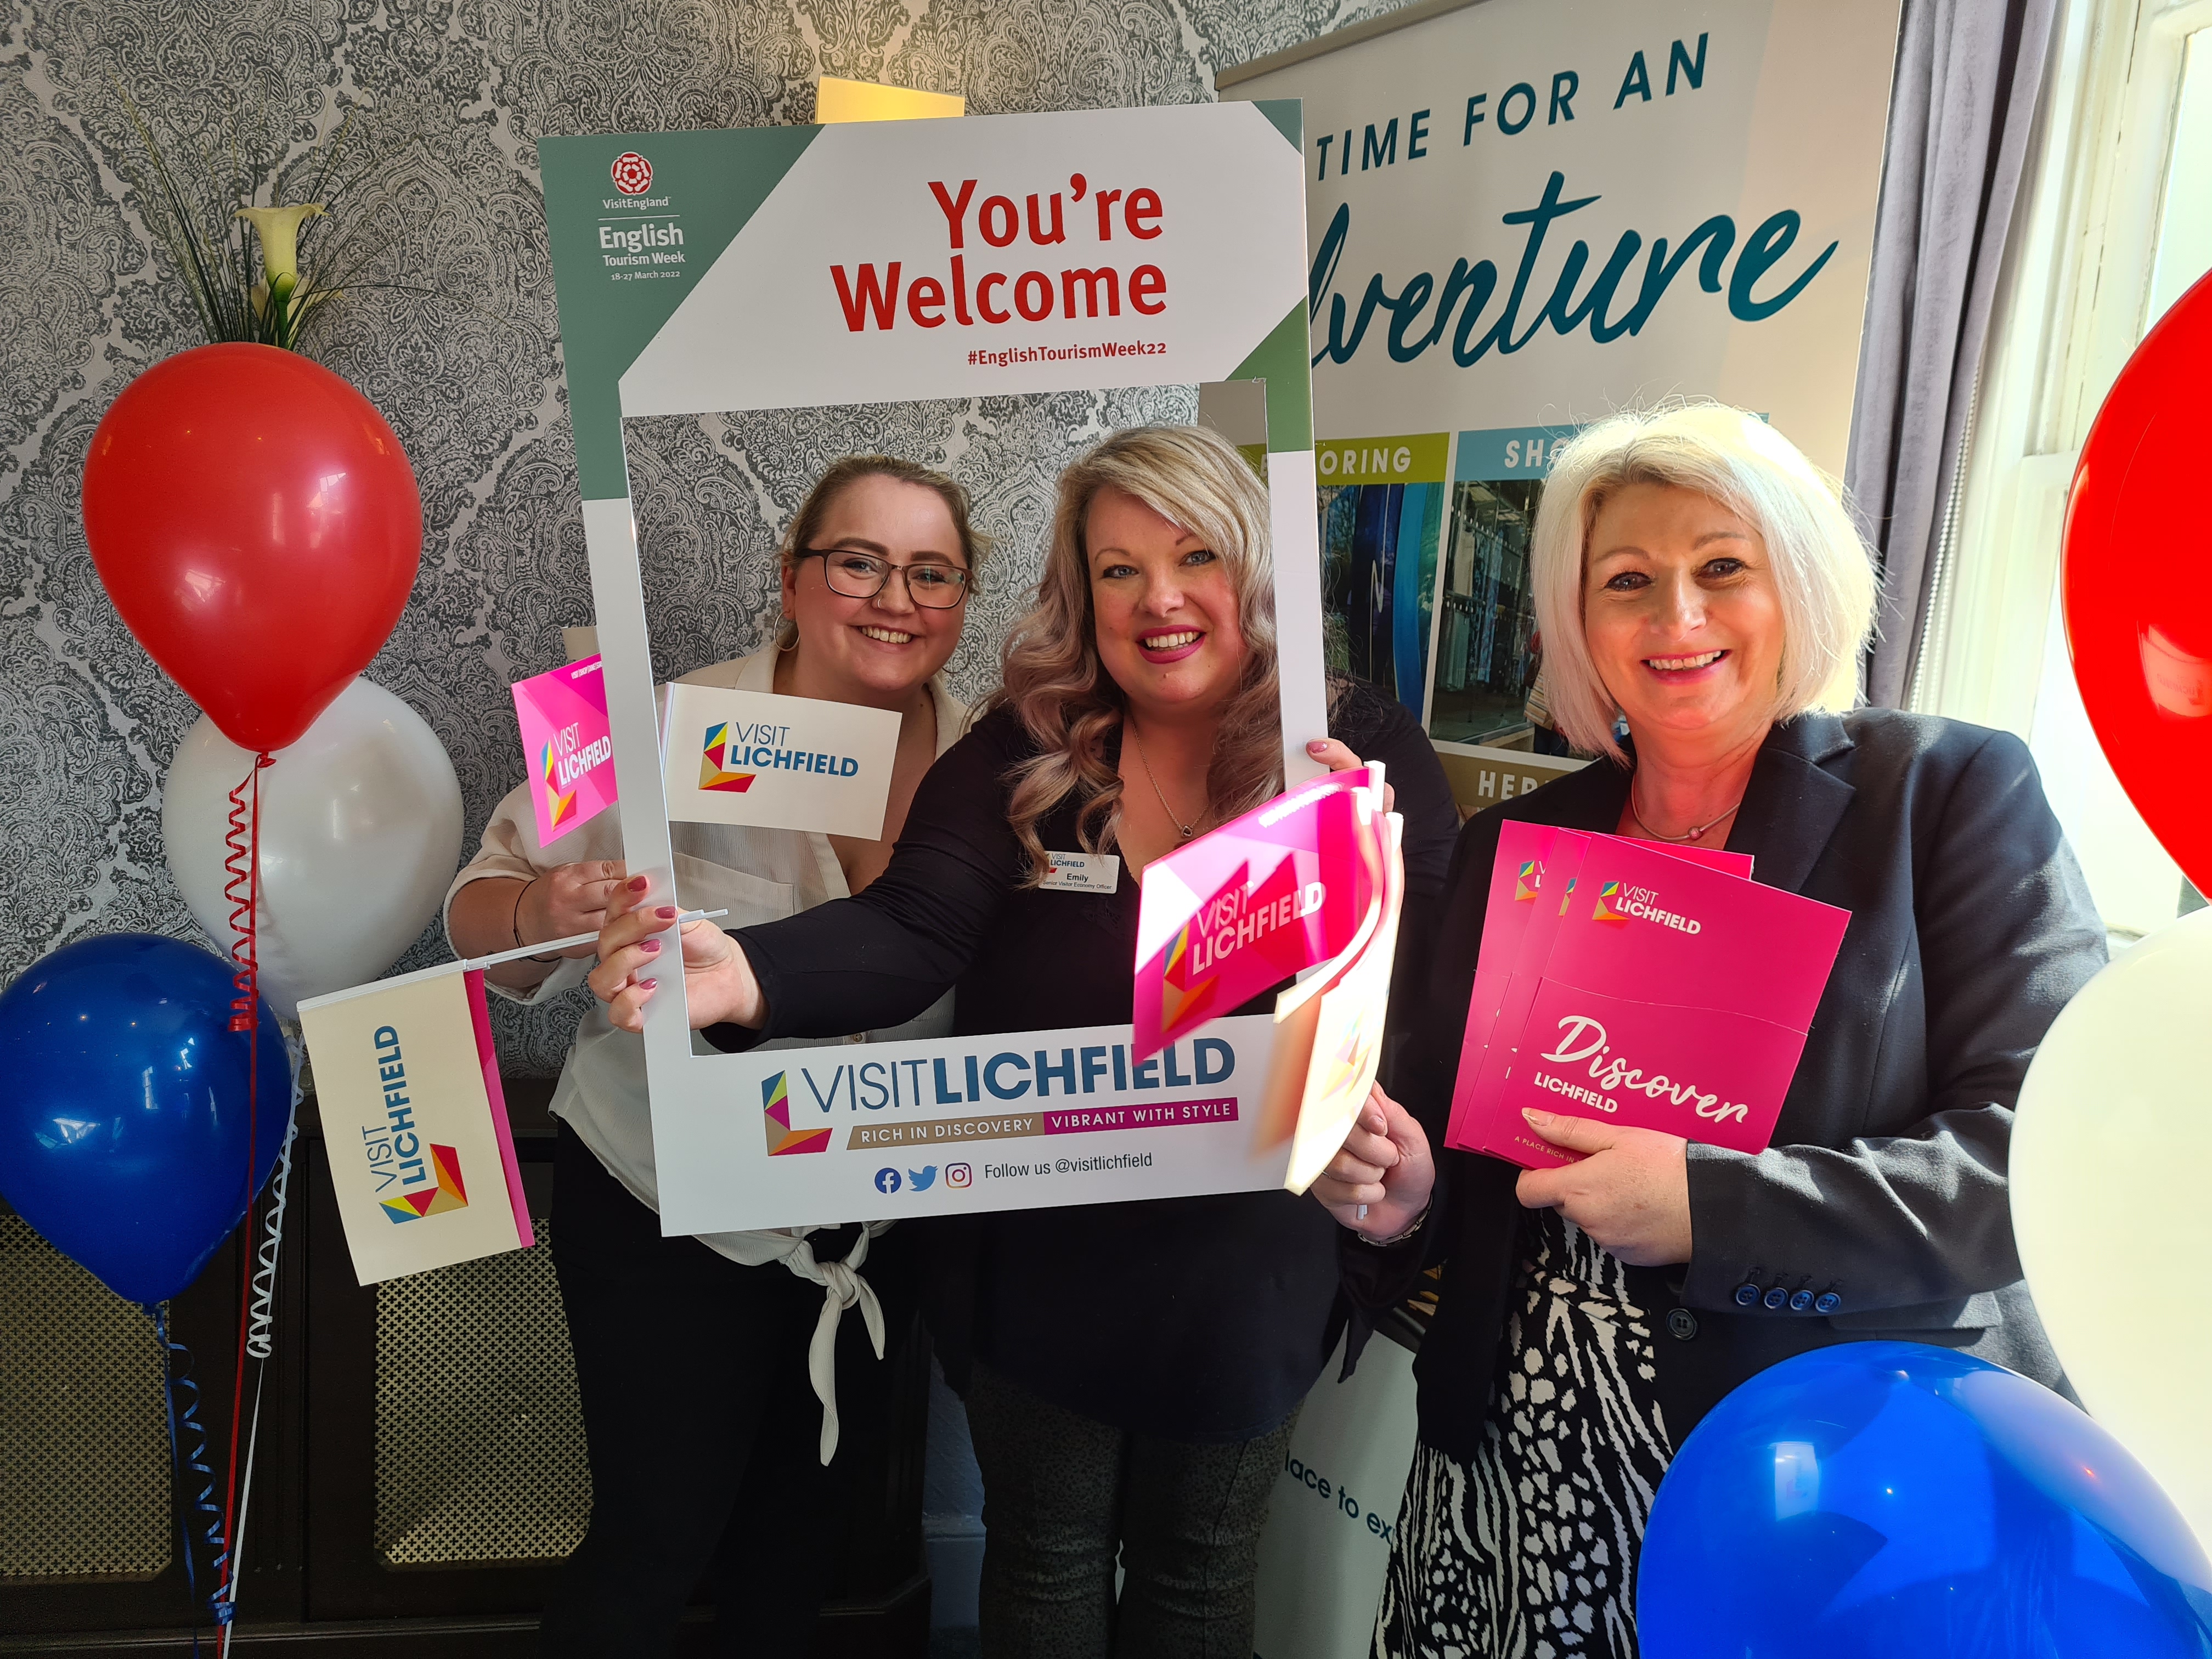 The Visit Lichfield team promotes new visitor packs at The George Hotel.